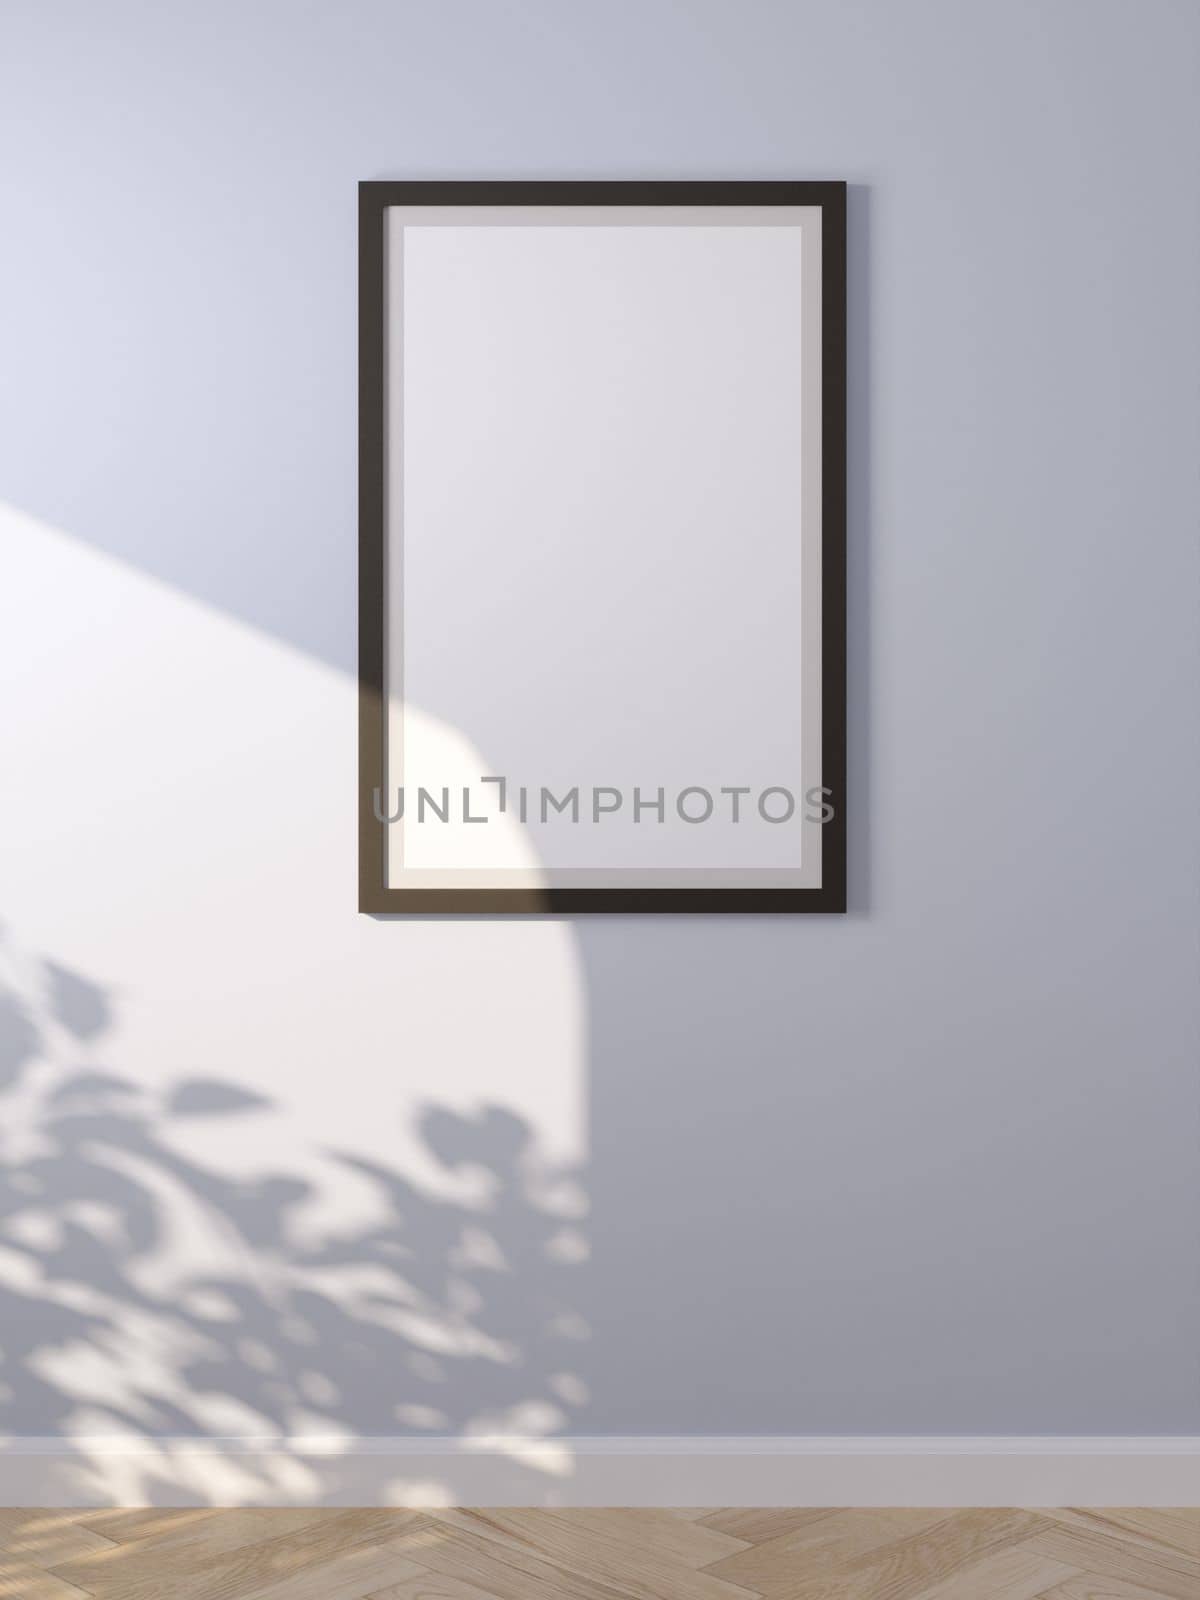 3d rendering of an empty frame on the wall. Black frame on the wall with rays from the sun.